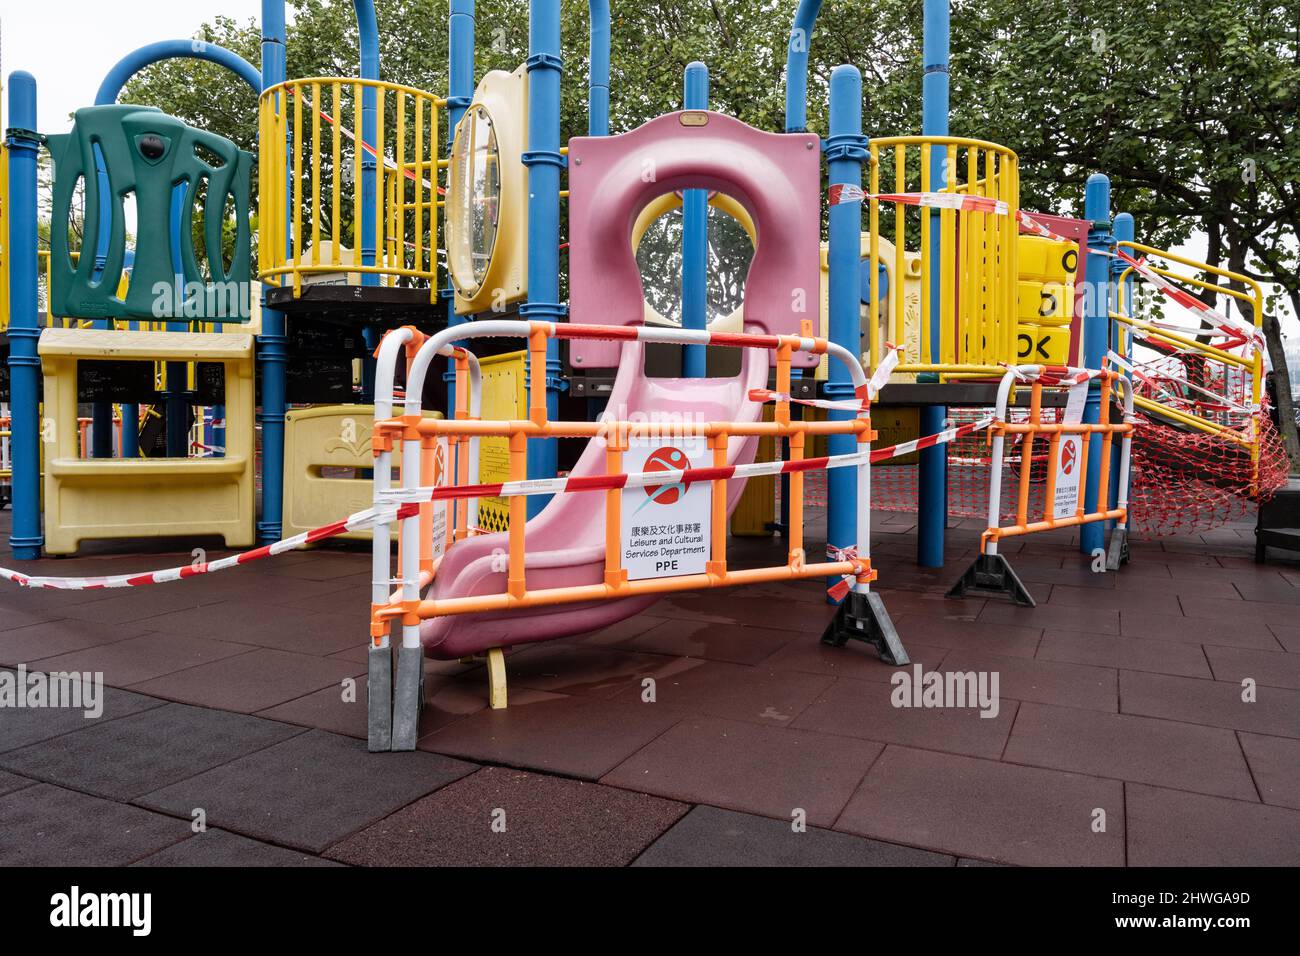 Zero Covid Hong Kong. Omicron.  2022.  Covid social restrictions in Hong Kong forcing public places and recreational facilities  to close due to Omicron. Childrens playground closed. Stock Photo